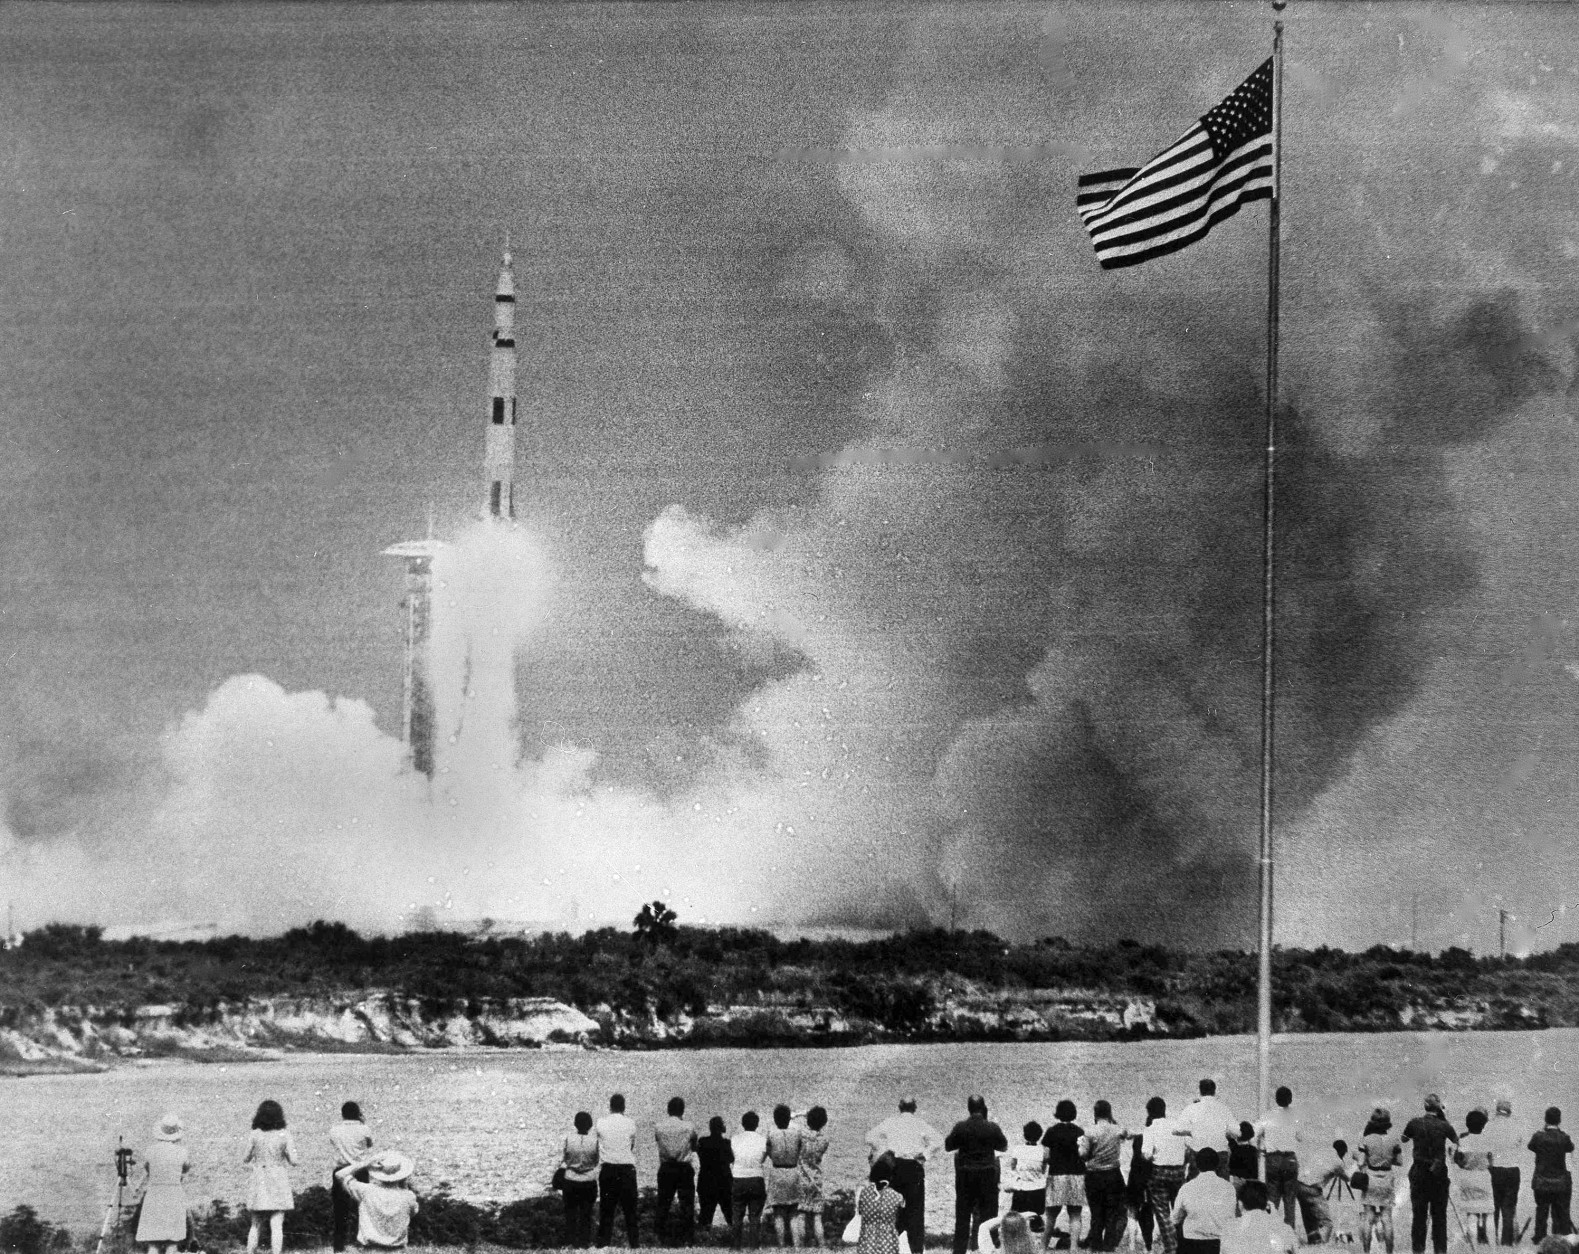 The huge Saturn rocket carrying the Apollo 13 spacecraft is on its moon mission, lifts off the launch pad at Cape Kennedy, Fla., April 11, 1970